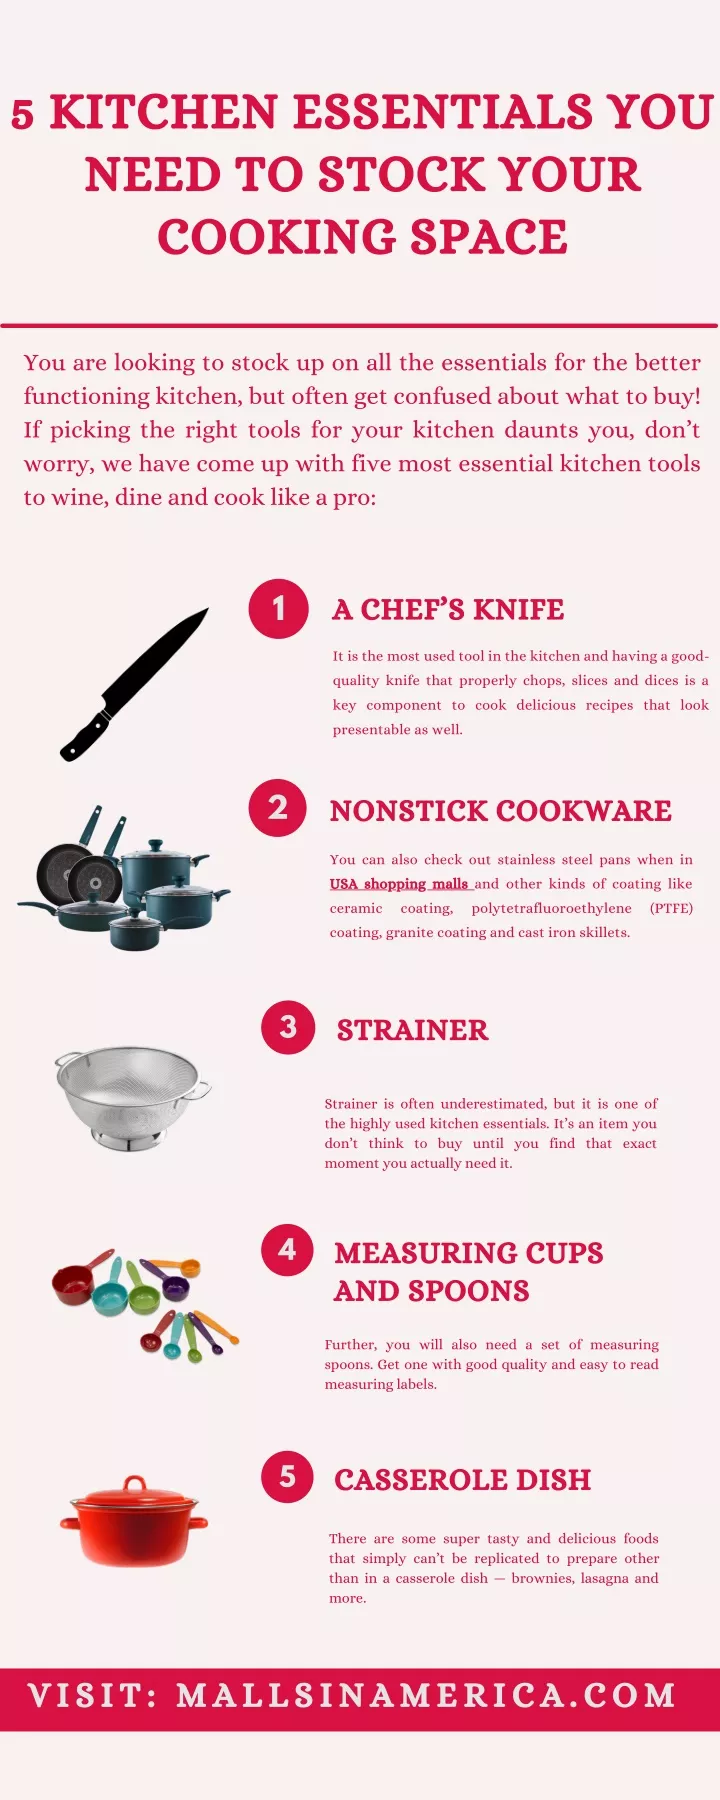 5 kitchen essentials you need to stock your